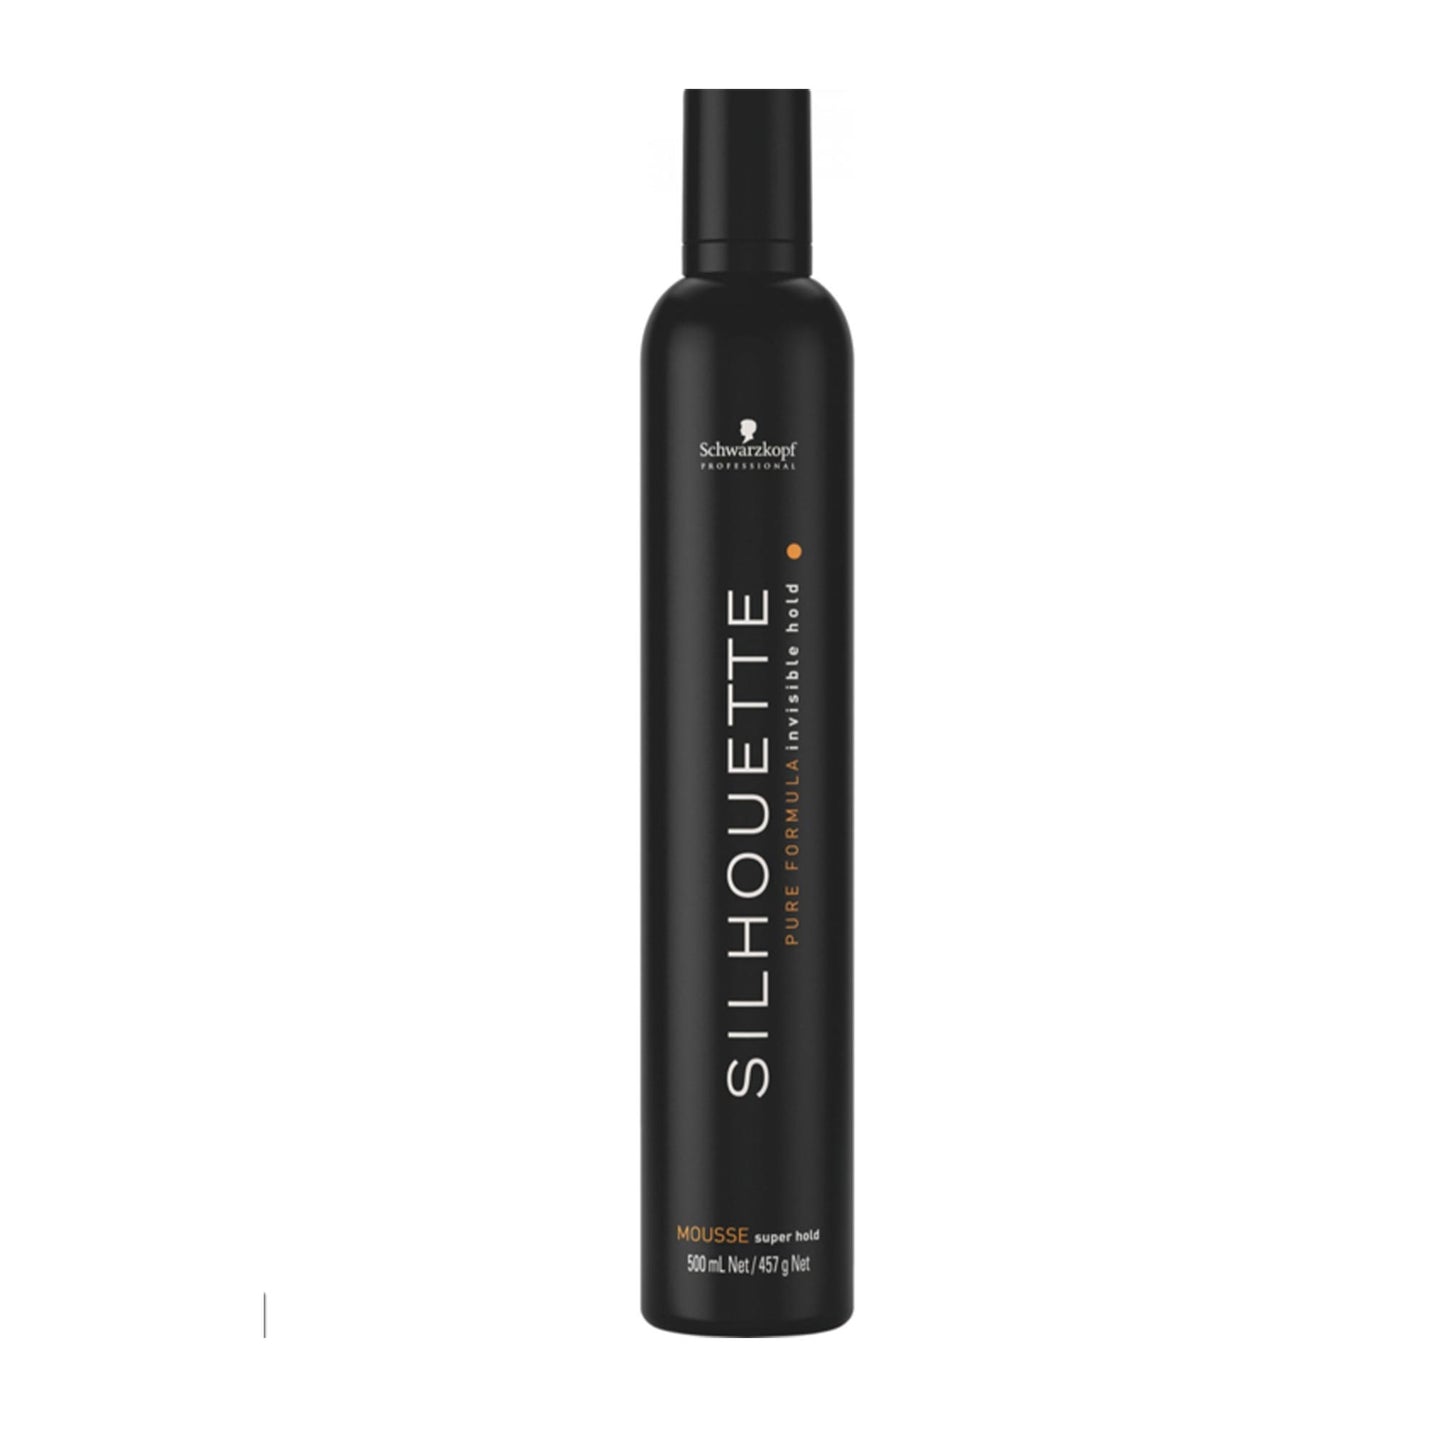 Silhouette Hair Mousse 500ml super hold